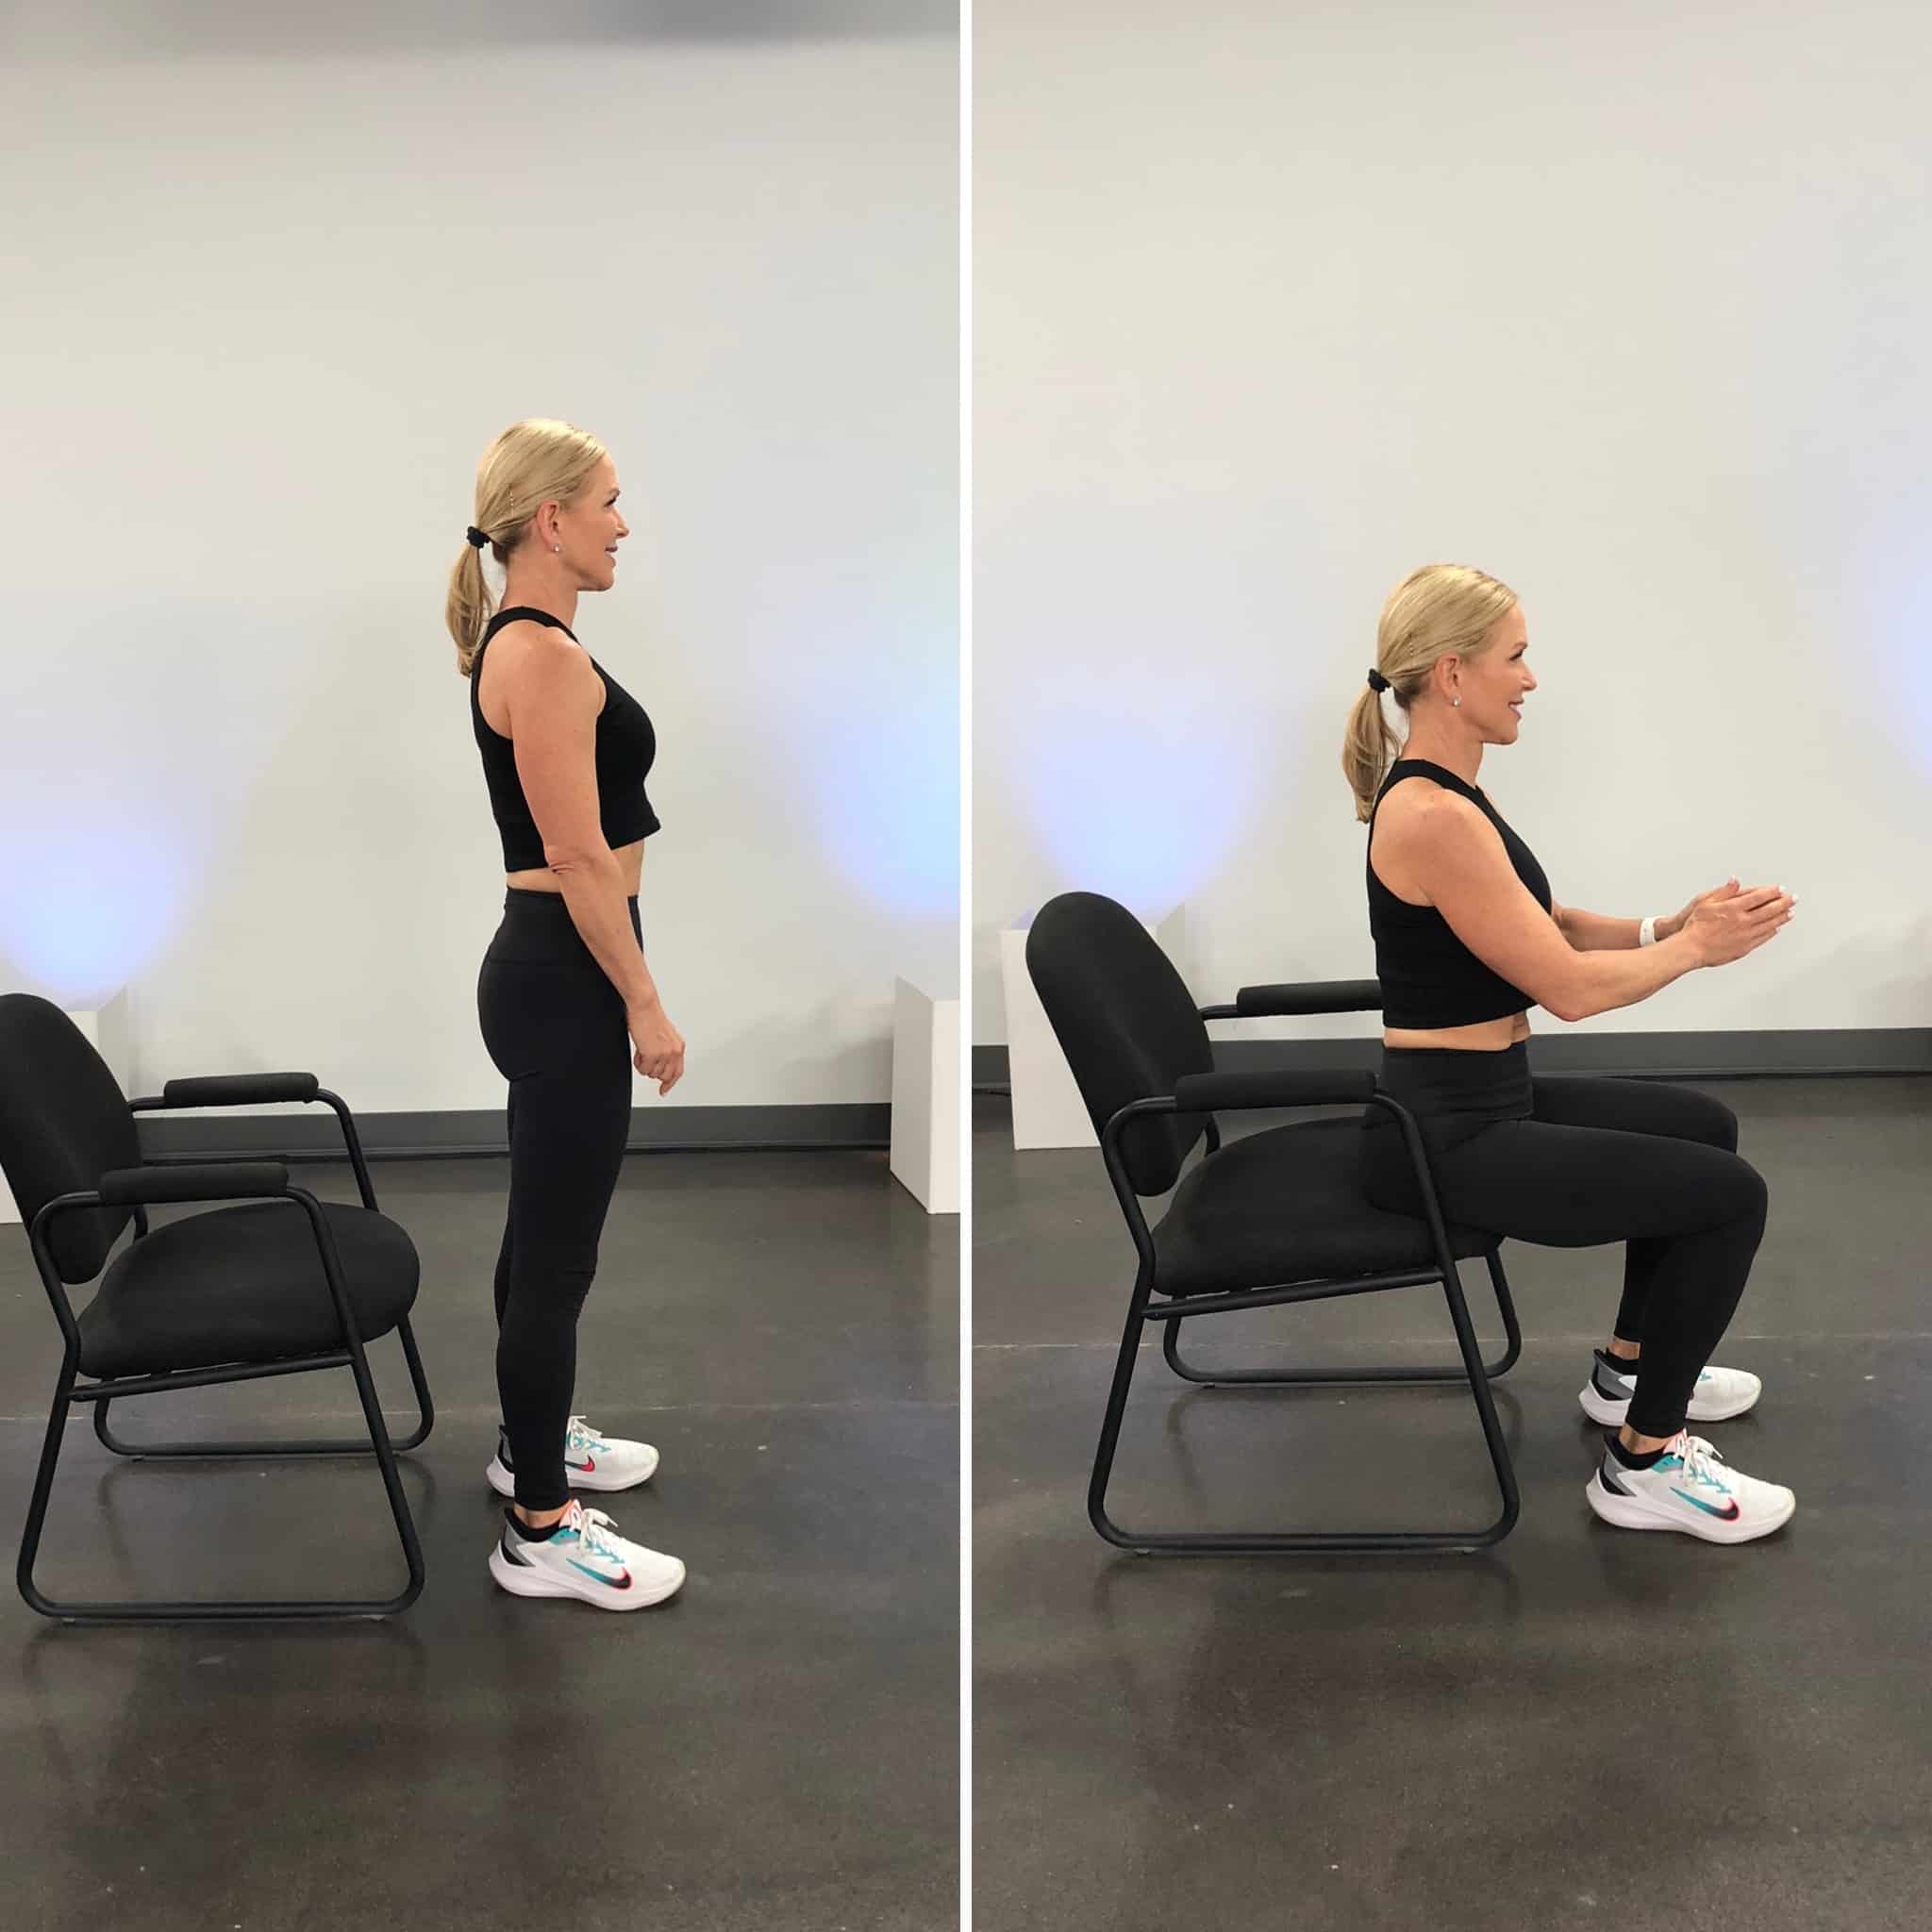 Chris Freytag demonstrating the two positions of a chair squat using a black chair.